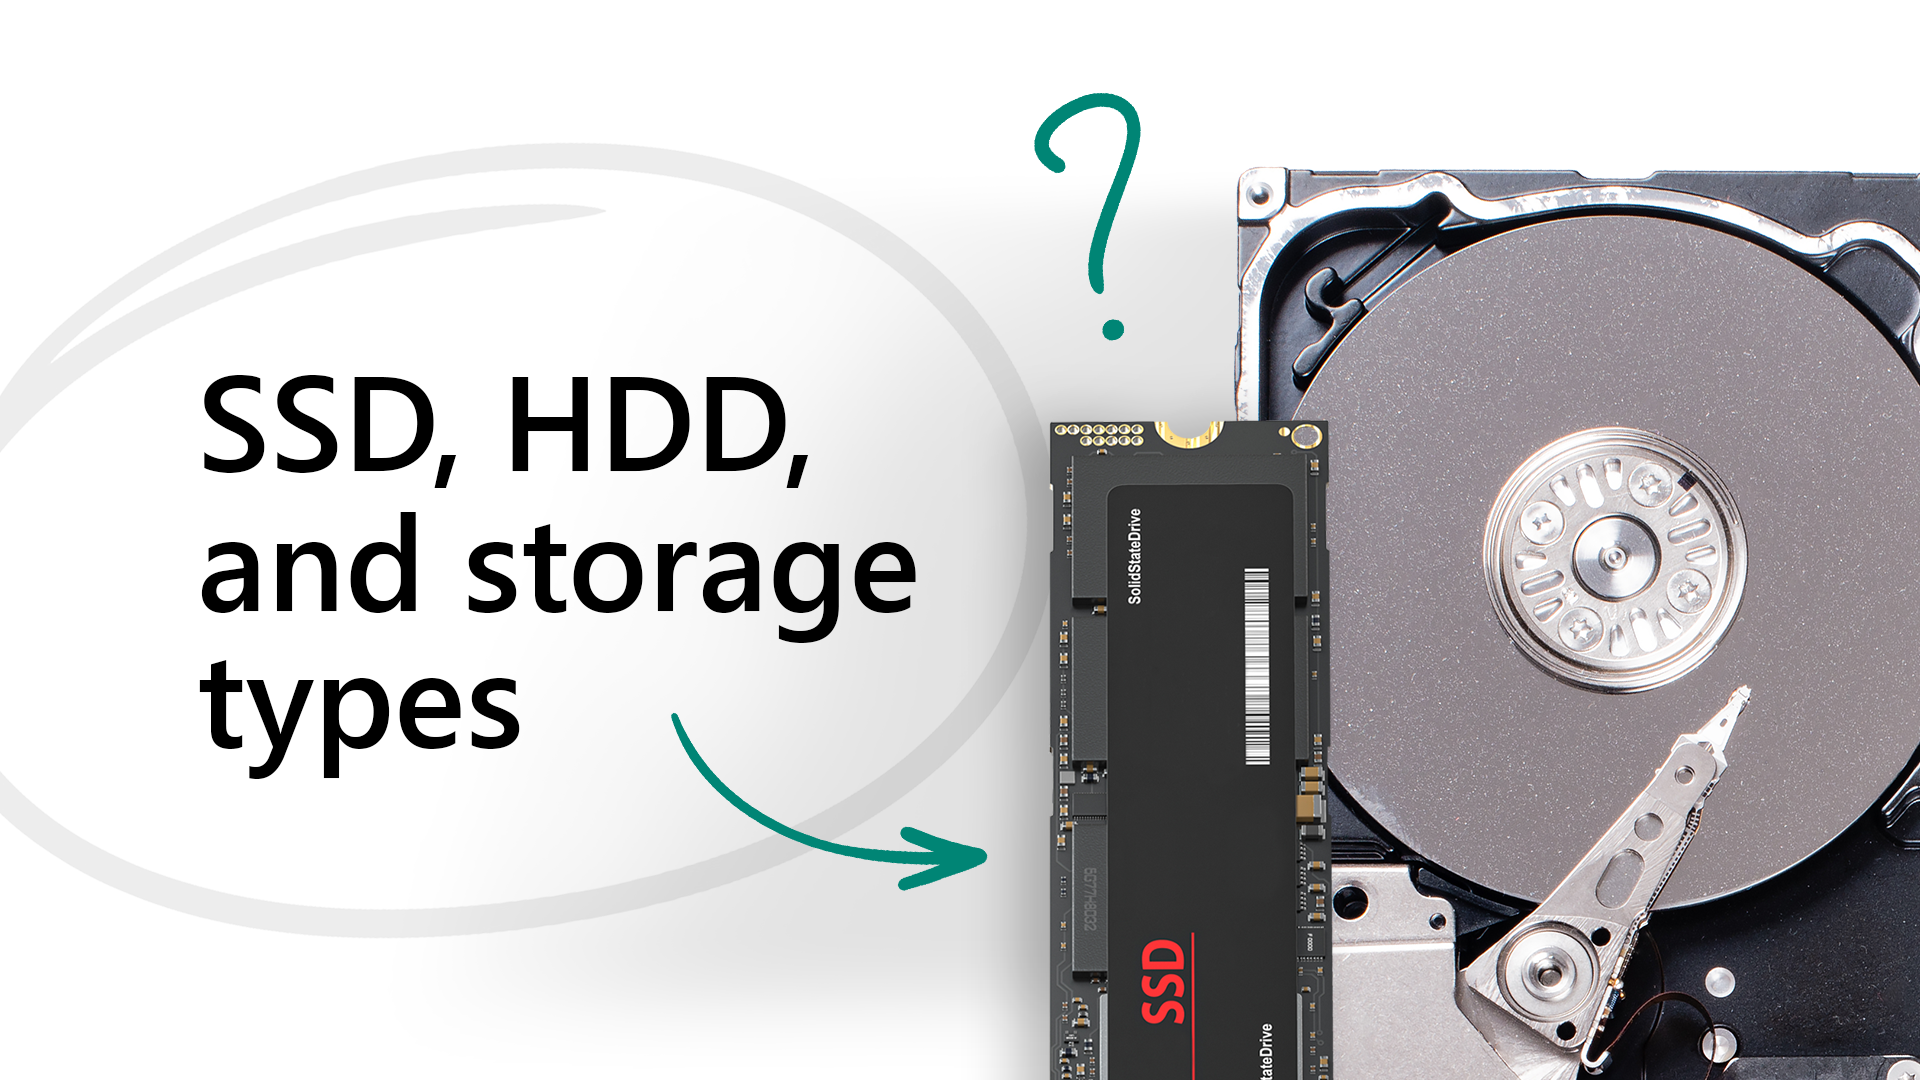 Alles over SSD, HDD - Ondersteuning